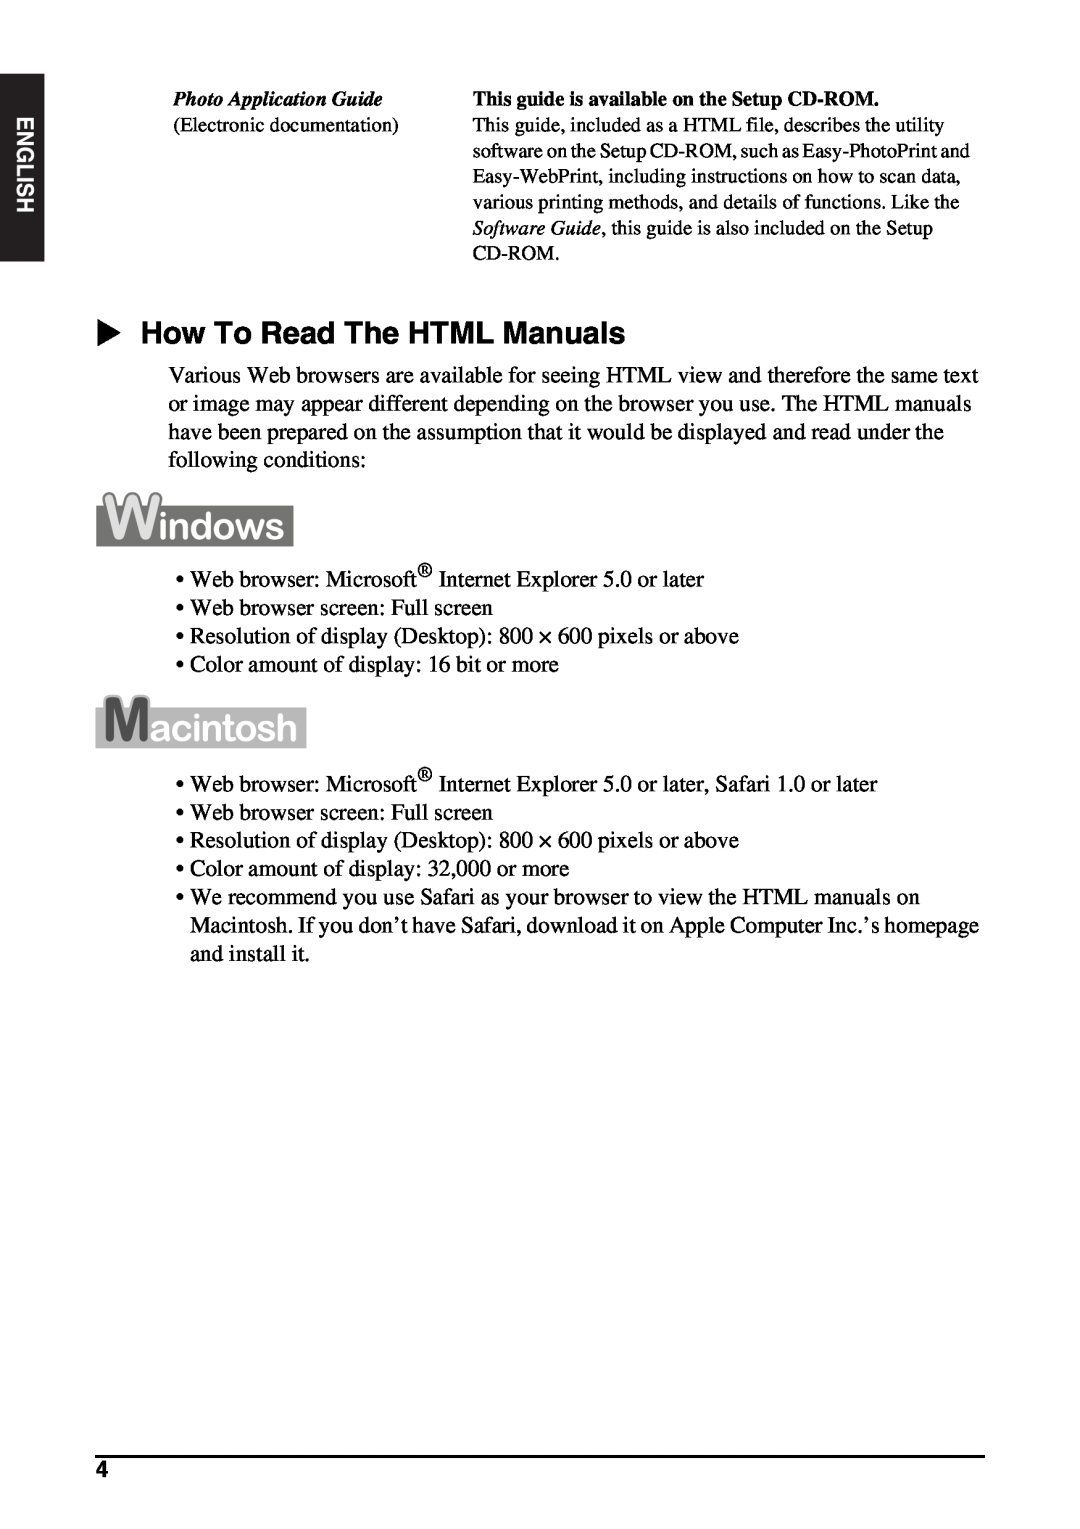 Canon MP130 manual X How To Read The HTML Manuals, Photo Application Guide 